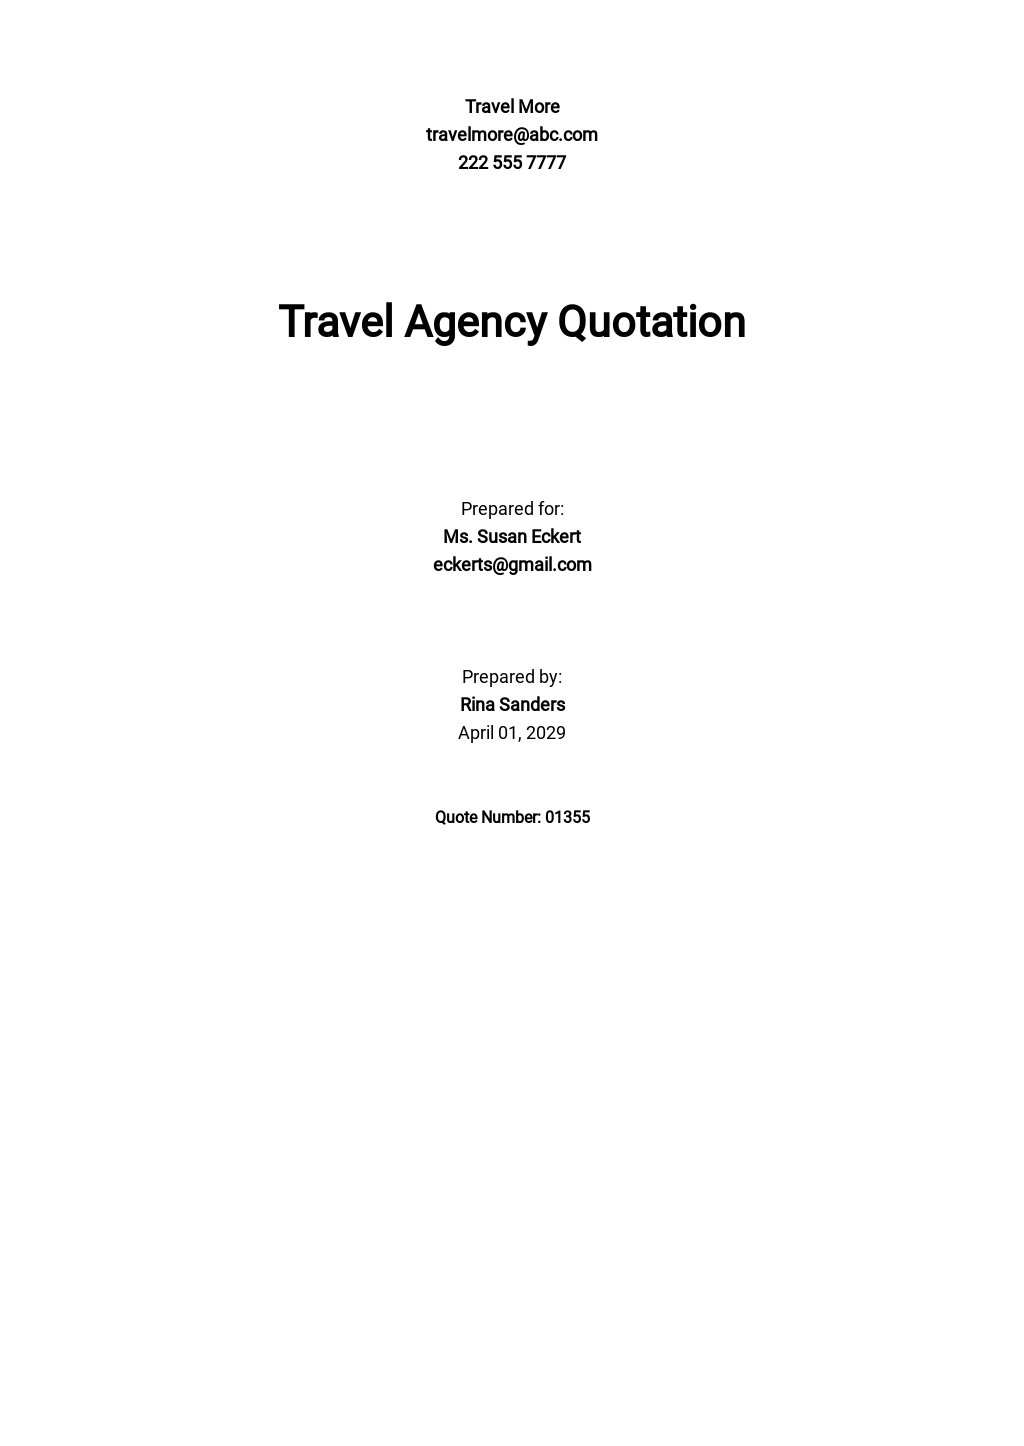 Simple Travel Agency Quotation Template.jpe